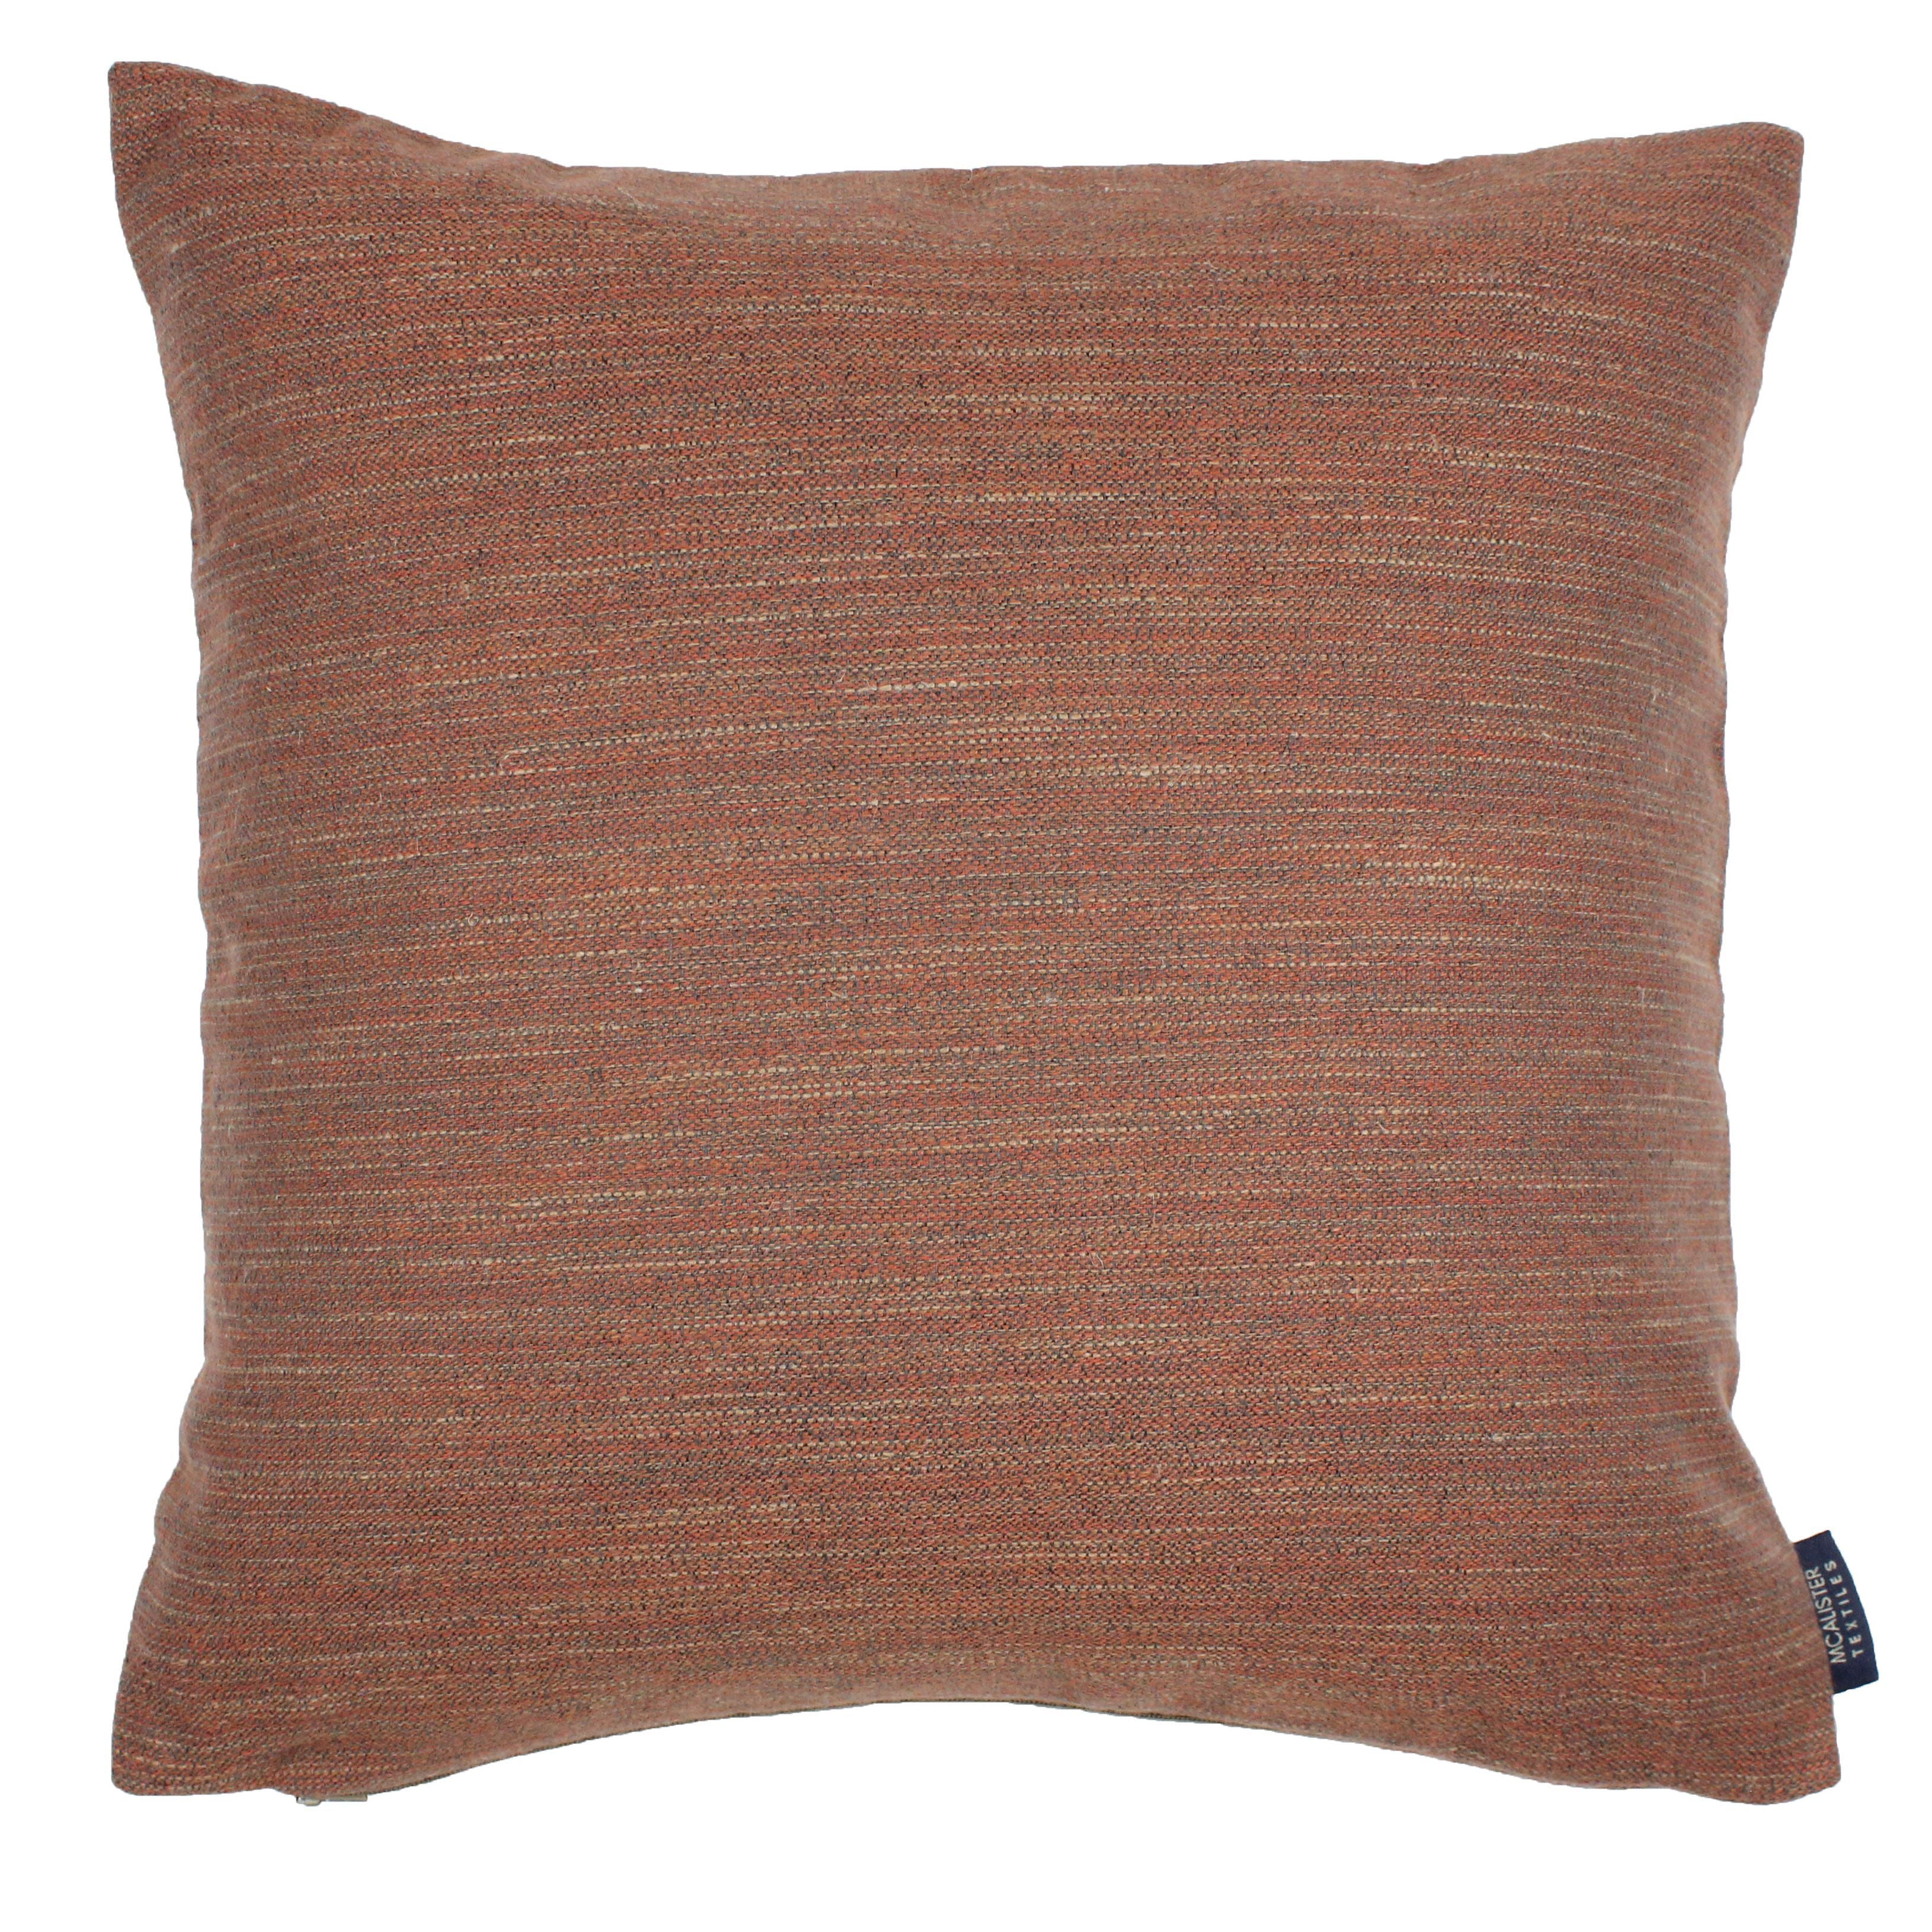 McAlister Textiles Hamleton Terracotta Textured Plain Cushion Cushions and Covers Cover Only 49cm x 49cm 